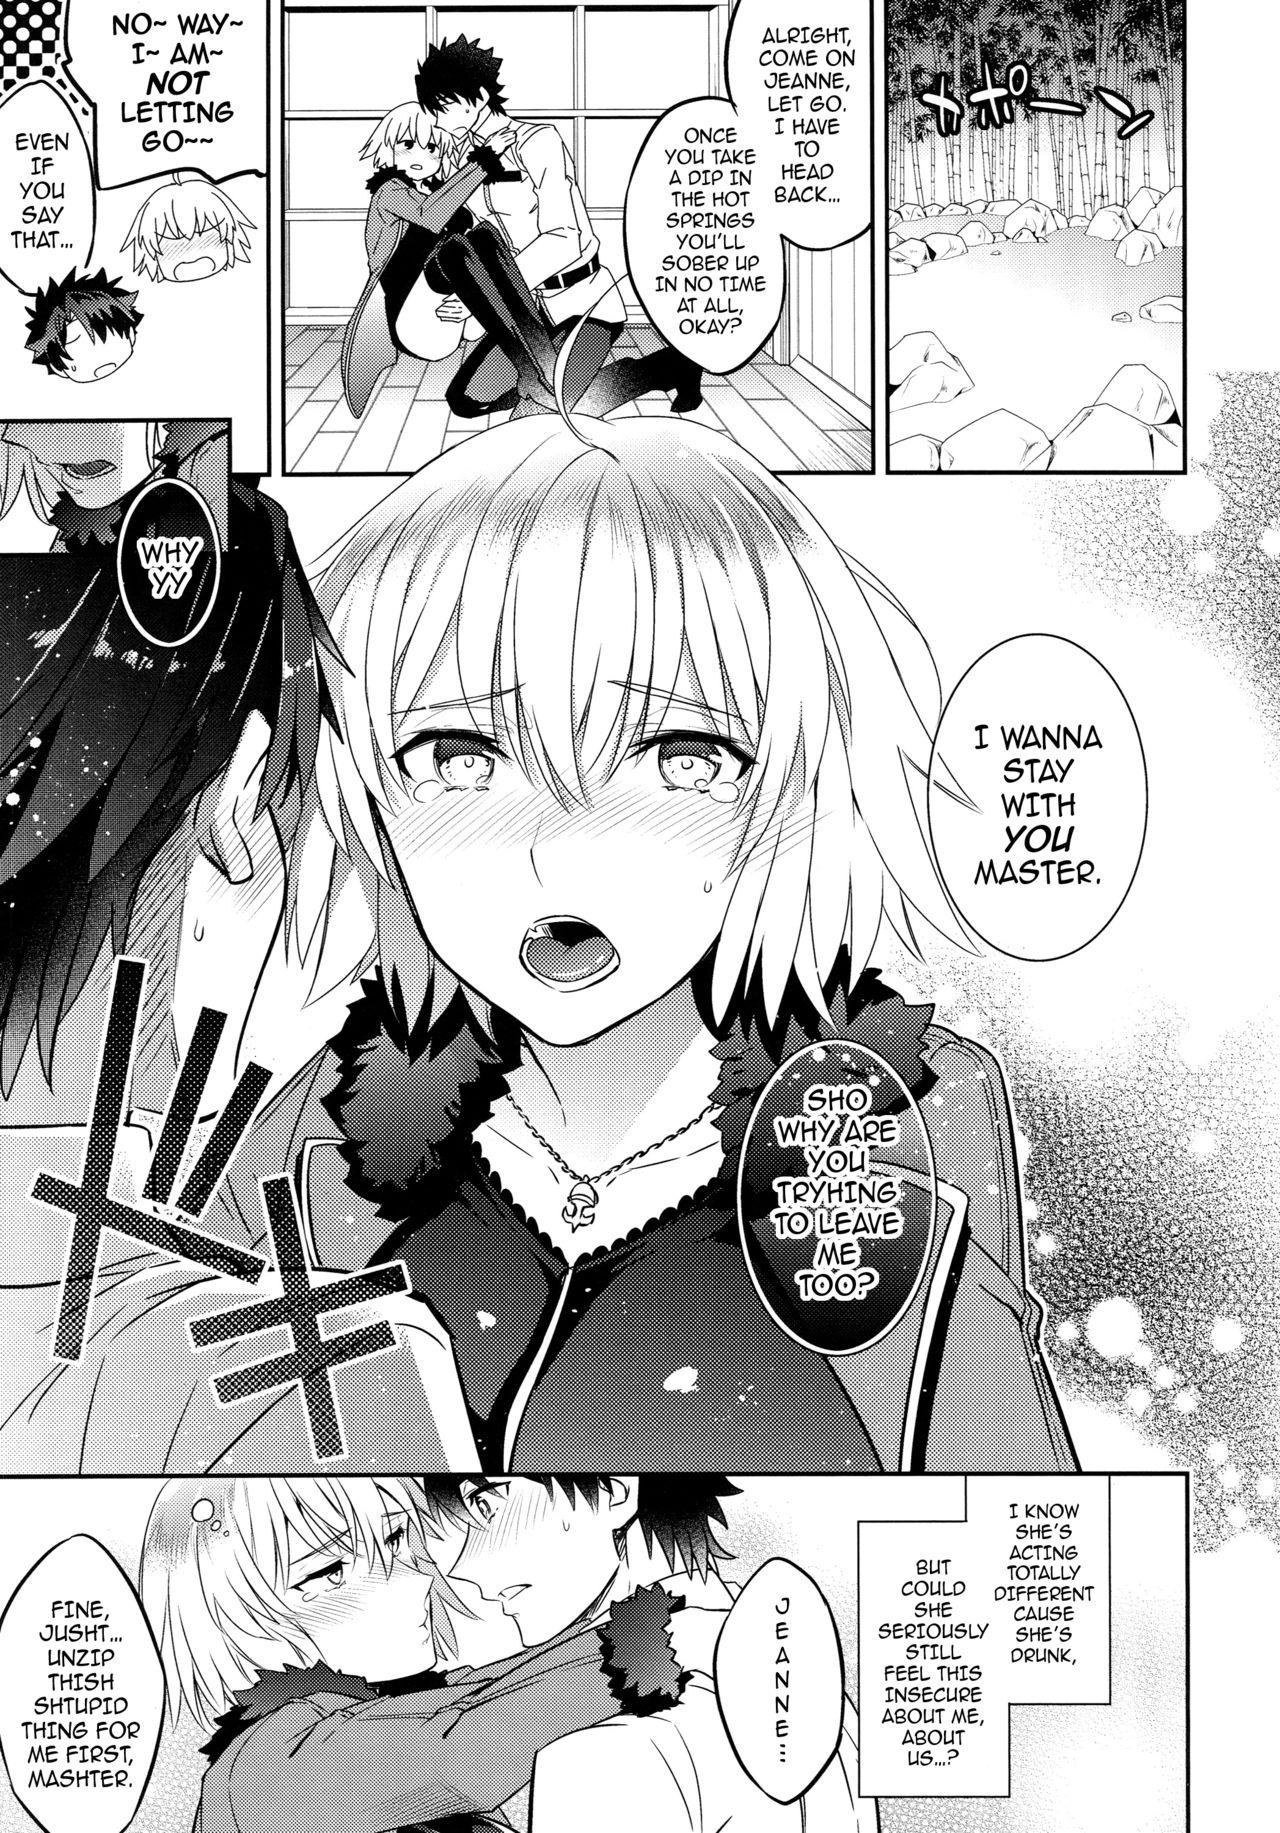 Transex (C94) [Crazy9 (Ichitaka)] C9-36 Jeanne Alter-chan to Yopparai Onsen | Getting Drunk in the Hot Springs with Little Miss Jeanne Alter (Fate/Grand Order) [English] {darknight} - Fate grand order Amateur Sex - Page 5